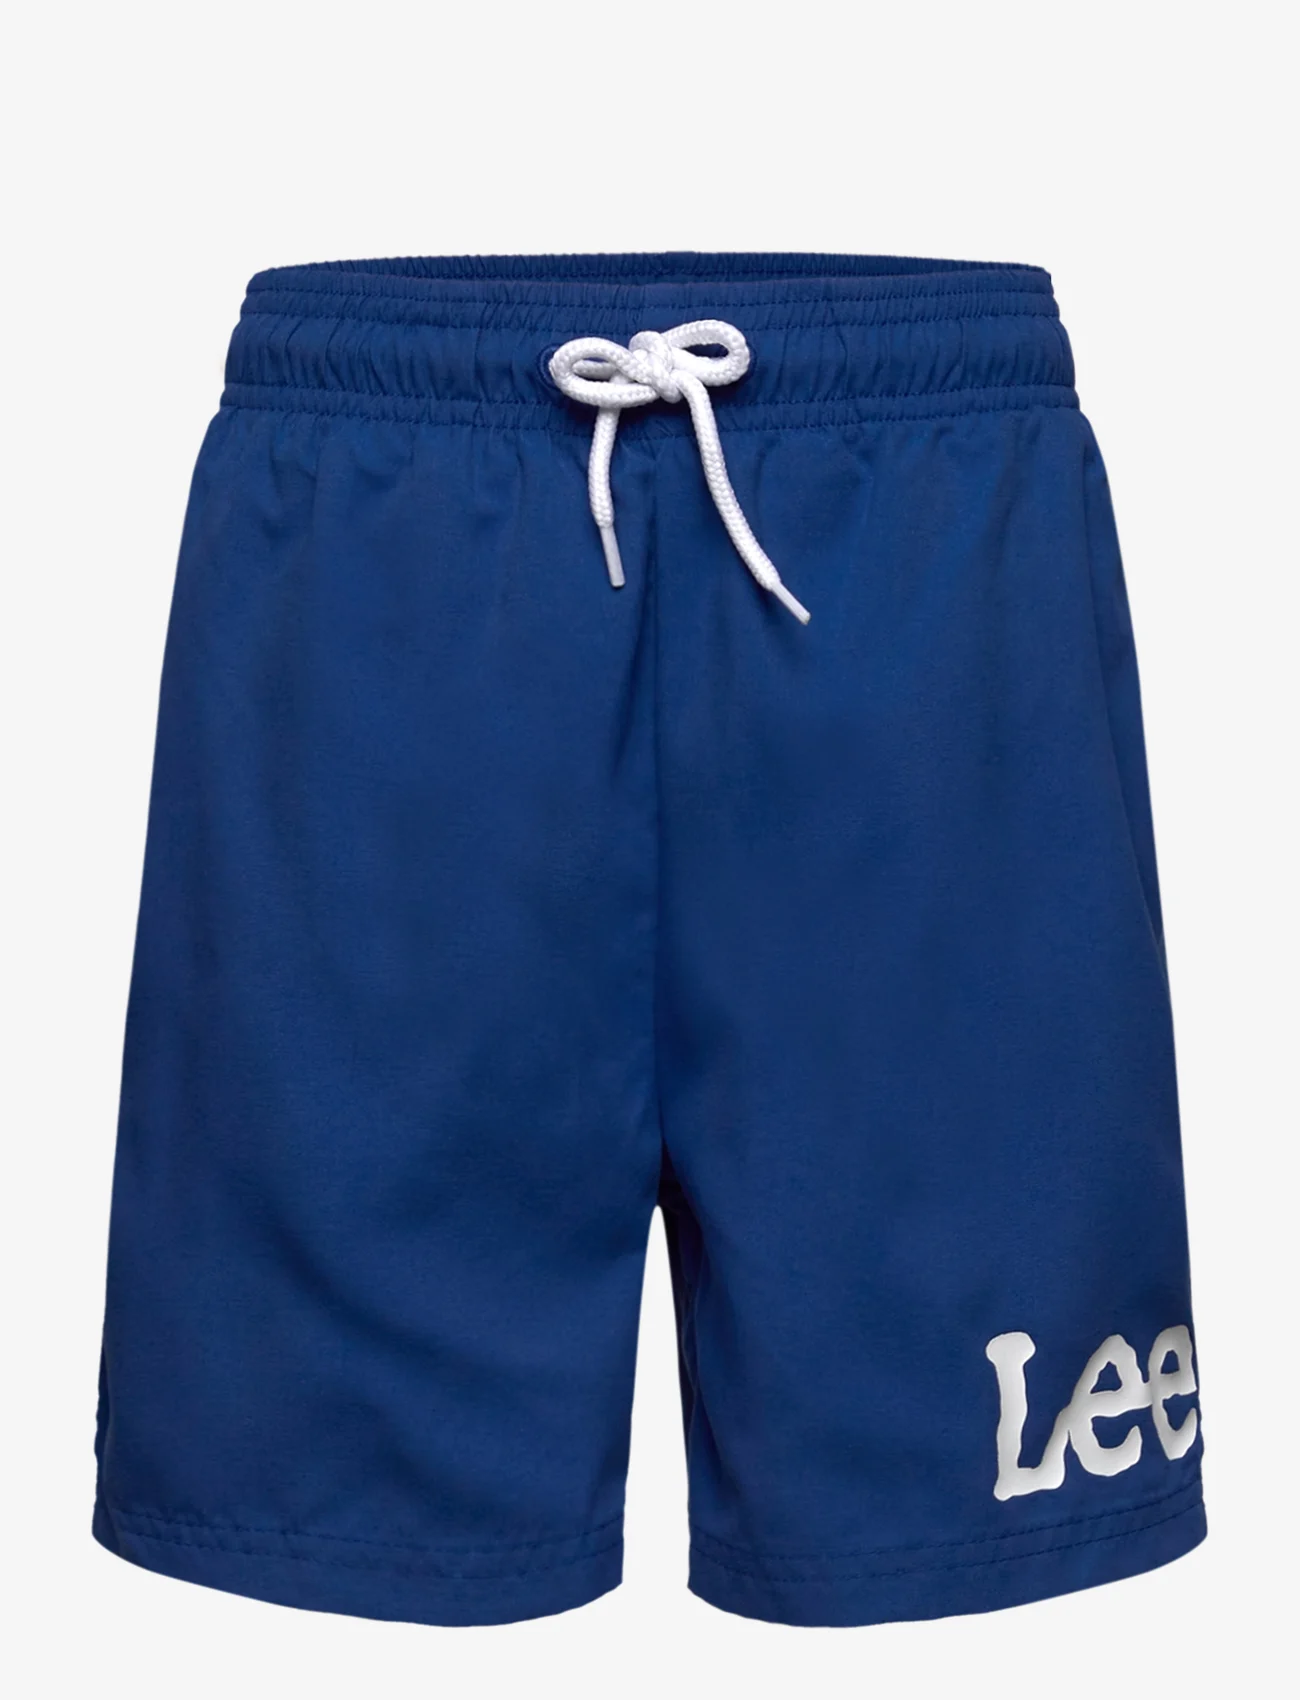 Lee Jeans - Wobbly Graphic Swimshort - sommarfynd - galaxy blue - 0